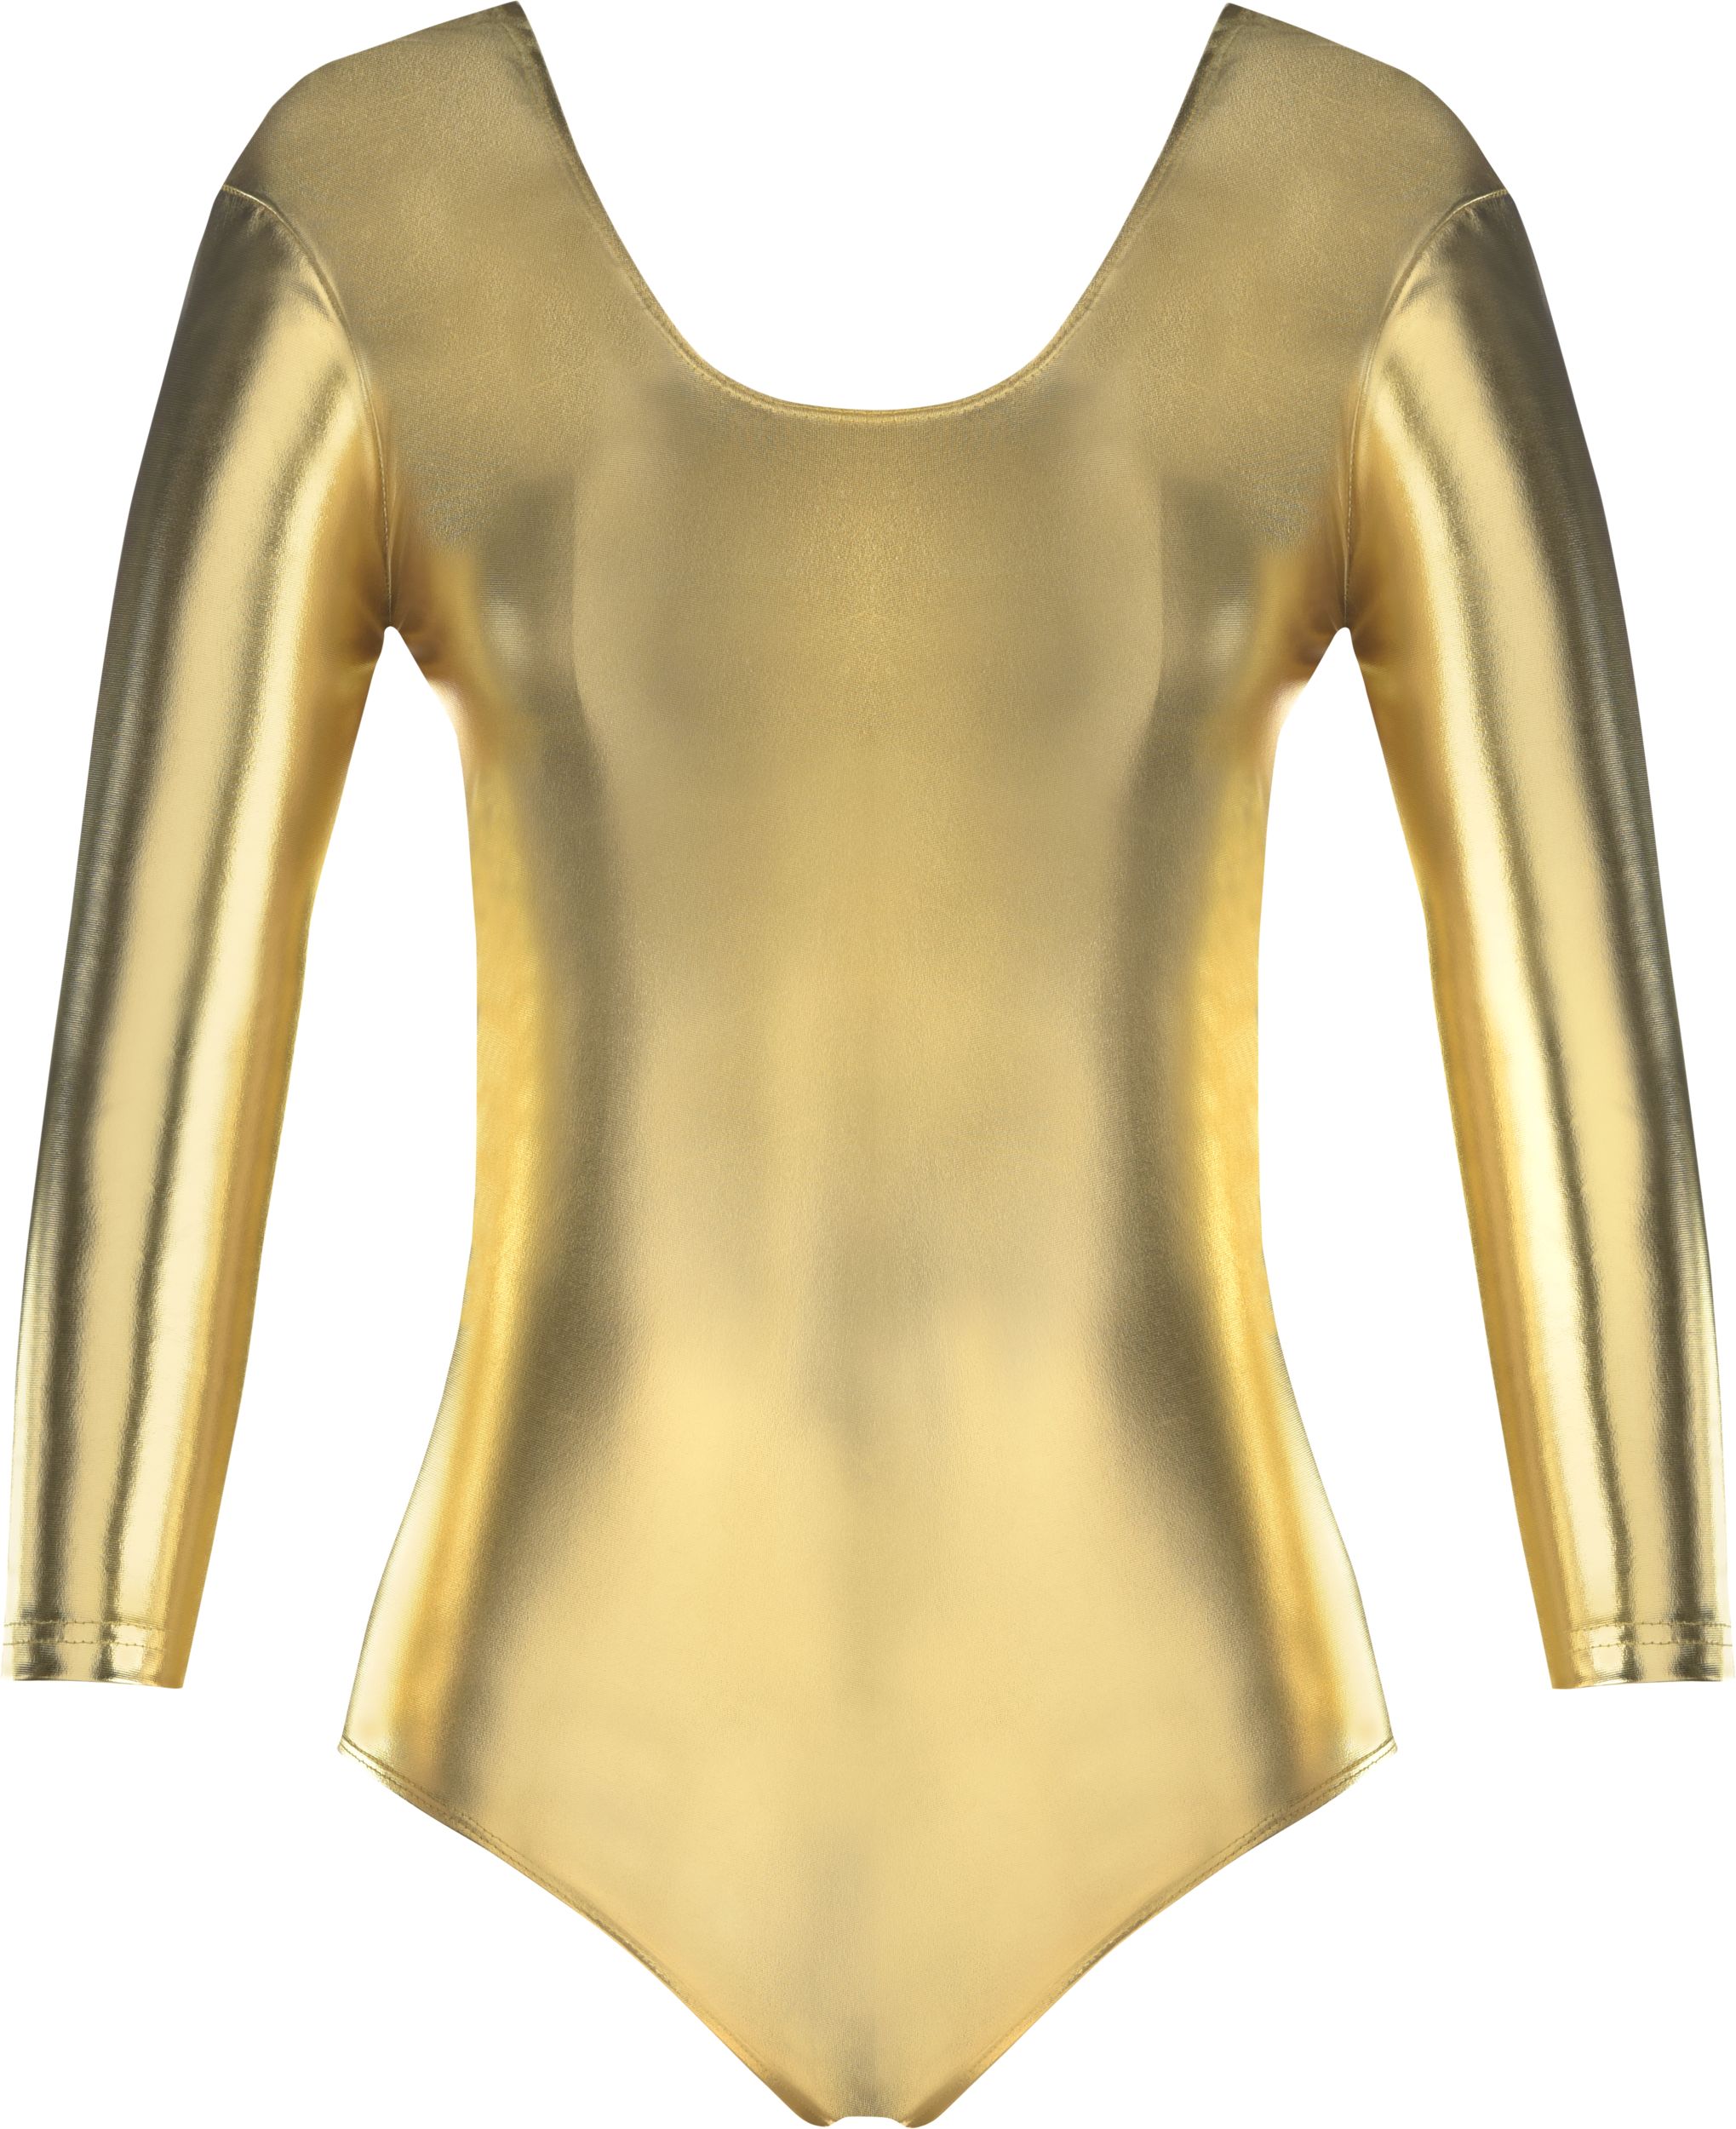 Second Life Marketplace - VictoriaV - Meredith Bodysuit Pattern Gold